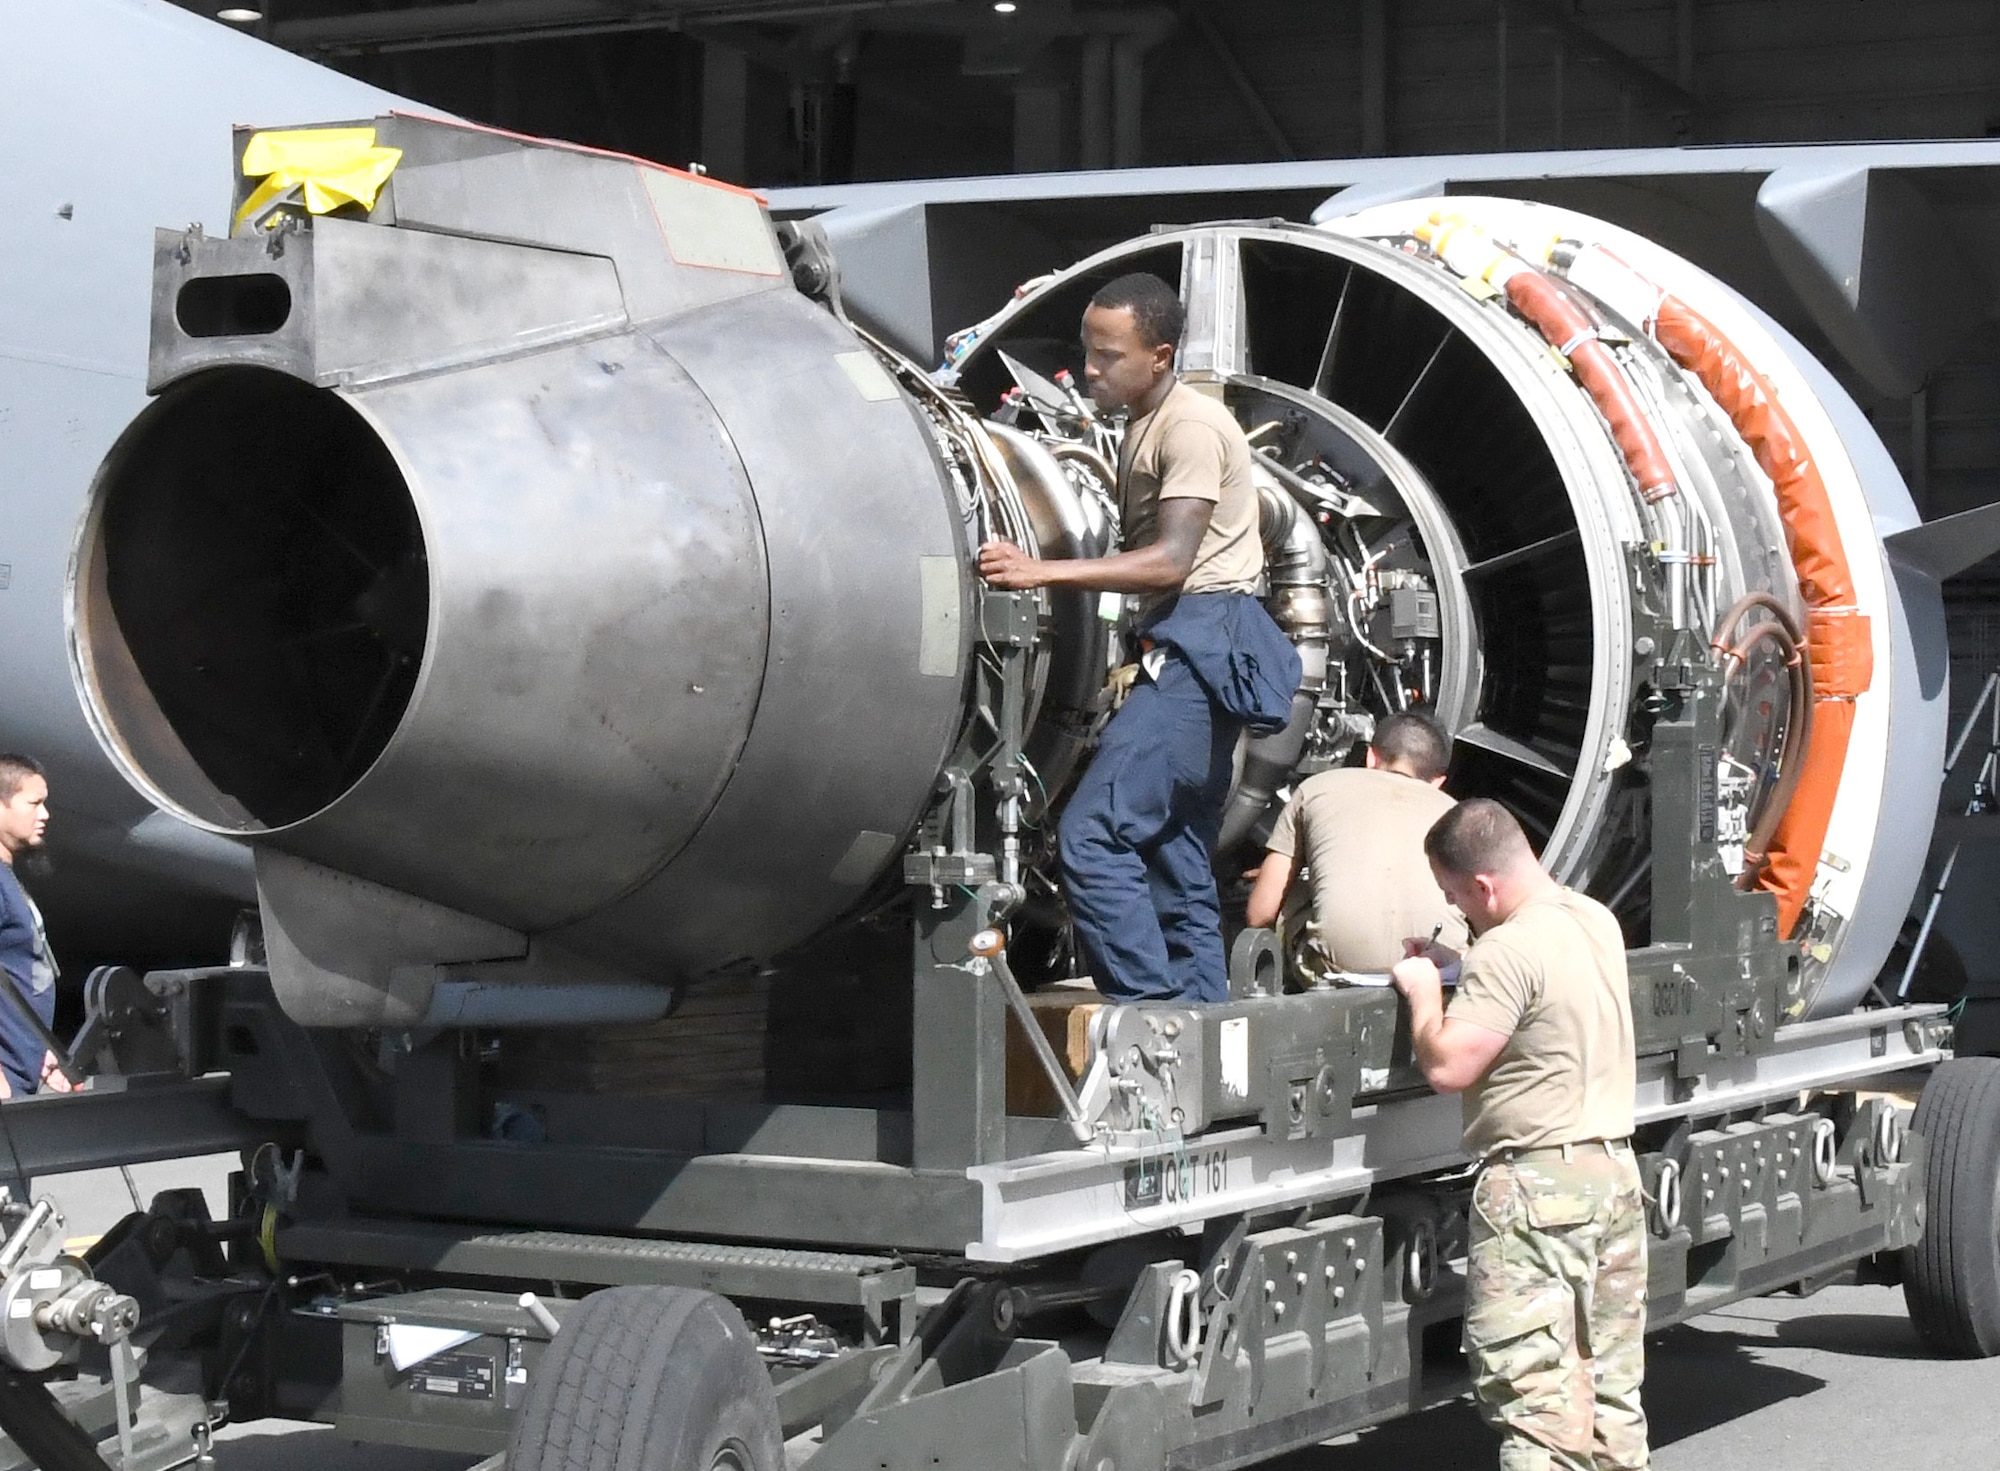 U.S. Air Force Senior Airman Lake Harper, left, and Tech. Sgt. Derek Lescord, both assigned to the 735th Air Mobility Squadron, prepare a C-17 Globemaster III engine for installation at Joint Base Pearl Harbor-Hickam, Hawaii on Aug. 19, 2022. (U.S. Air Force photo by Amelia Dickson)